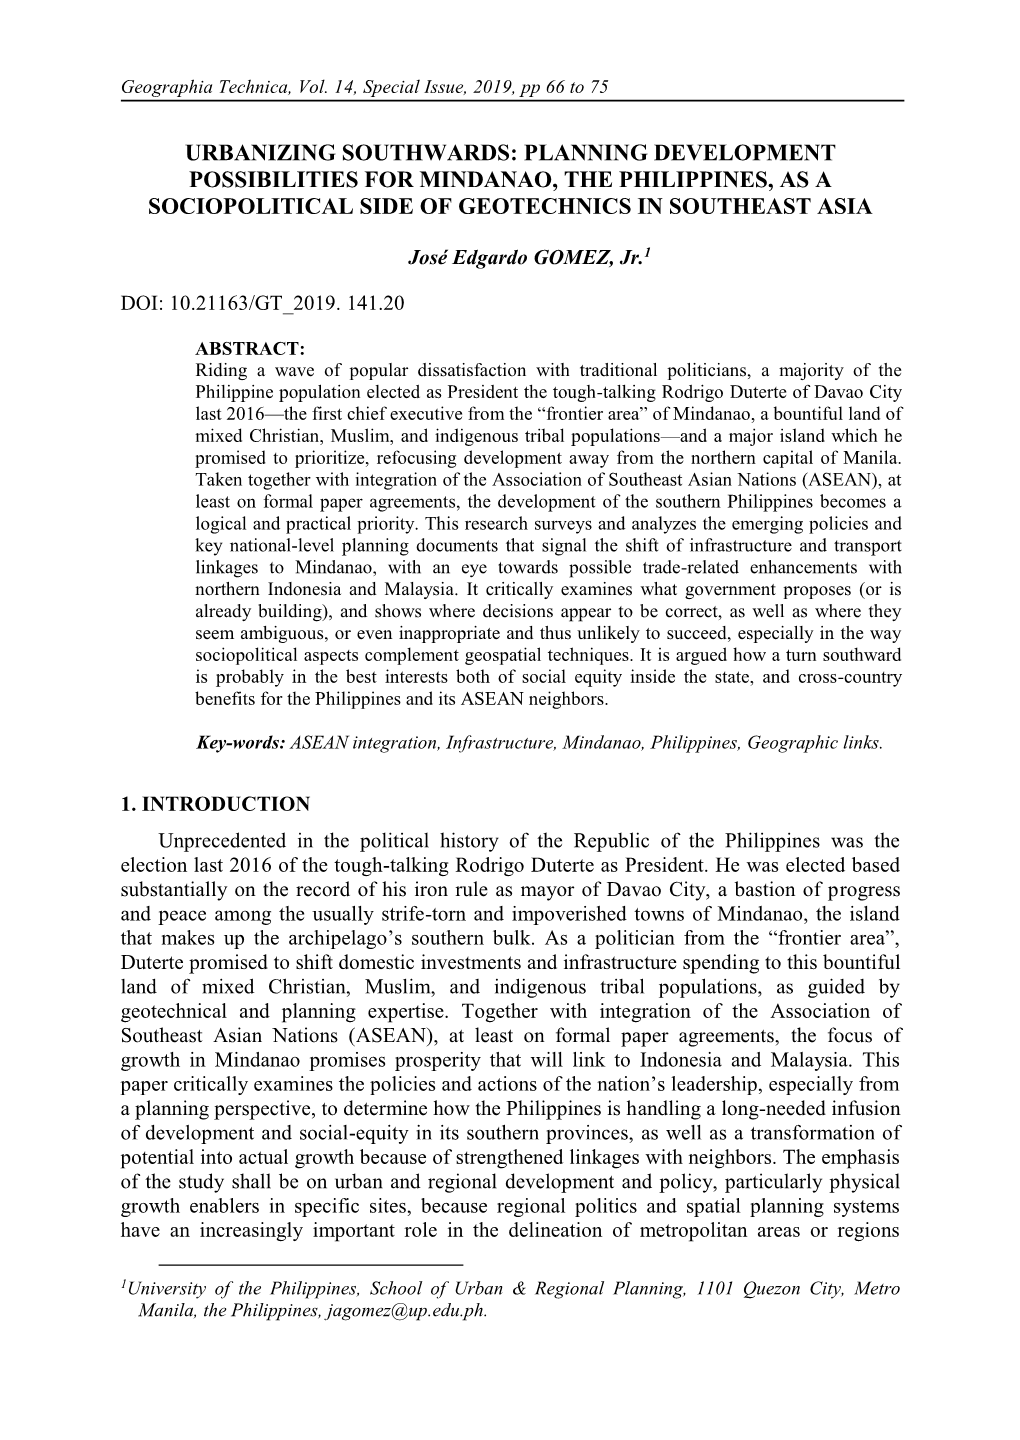 Planning Development Possibilities for Mindanao, the Philippines, As a Sociopolitical Side of Geotechnics in Southeast Asia